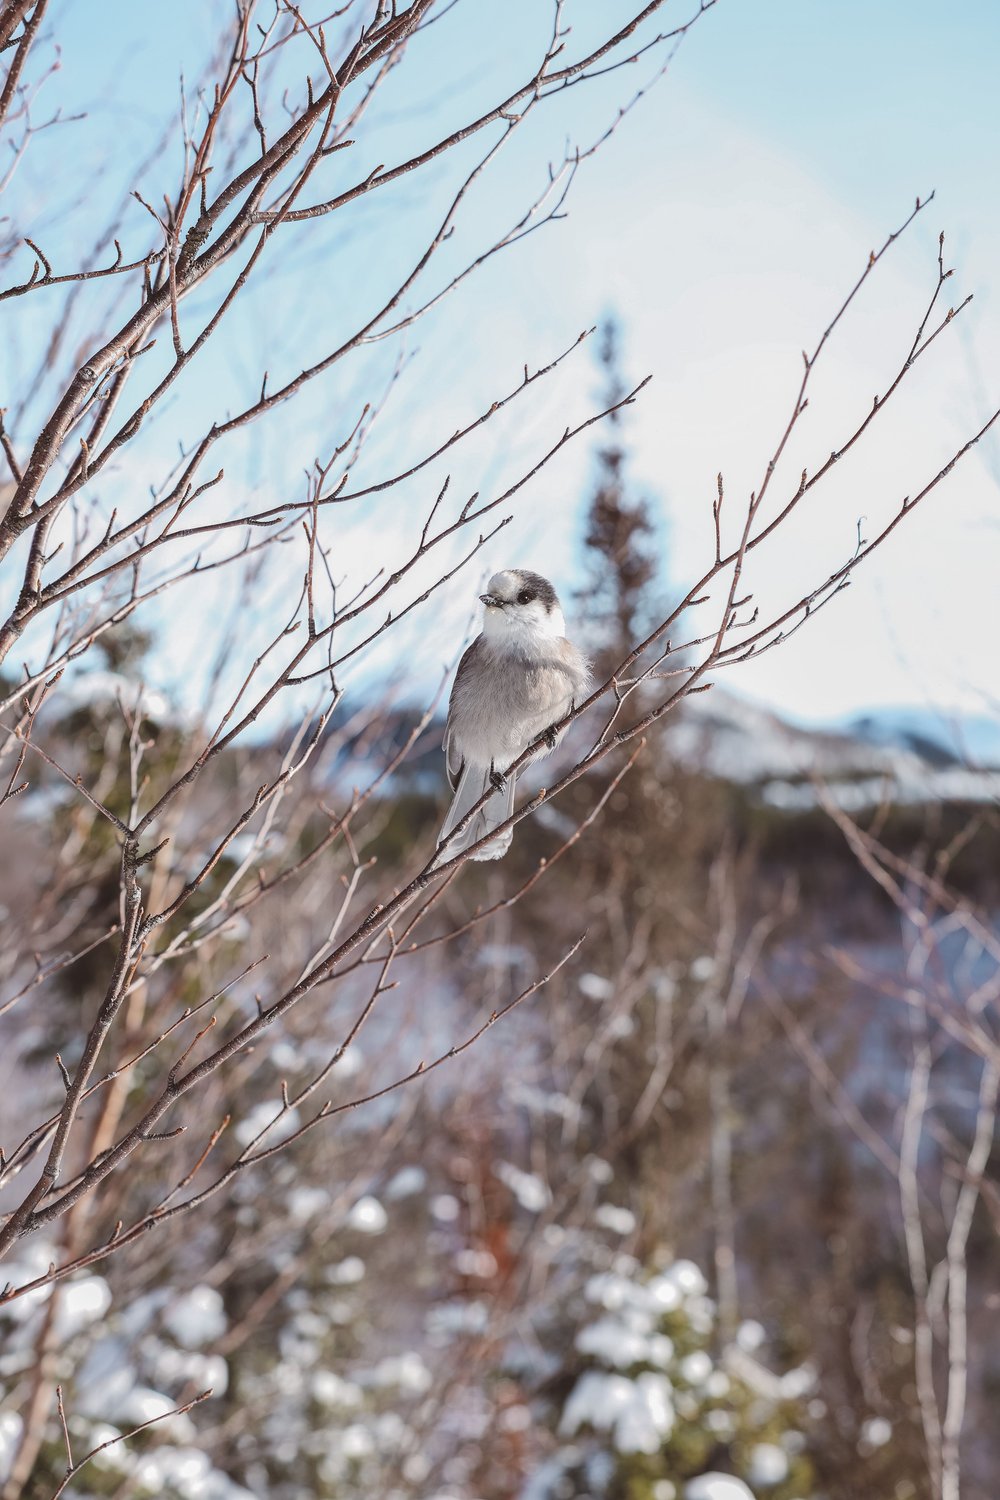 Super cute bird waiting for food in winter - Mount du Dôme - Charlevoix - Quebec - Canada